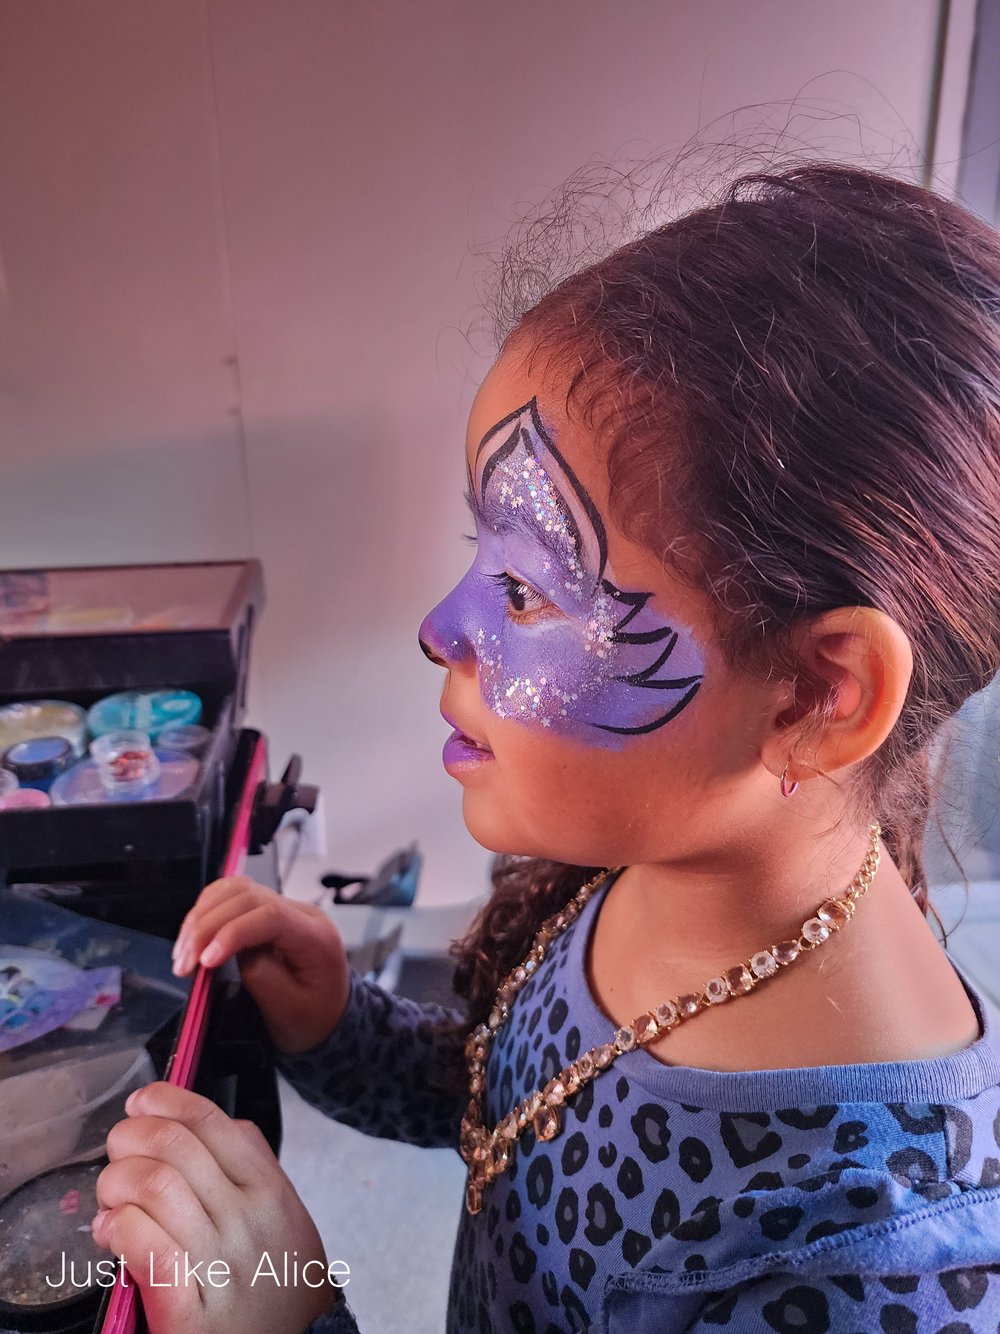 Professional face painting and custom face painting ideas. We are the best  face artists in the world and San Francisco Bay area - Make-up Your Mind  and Fantabulous Facepainting